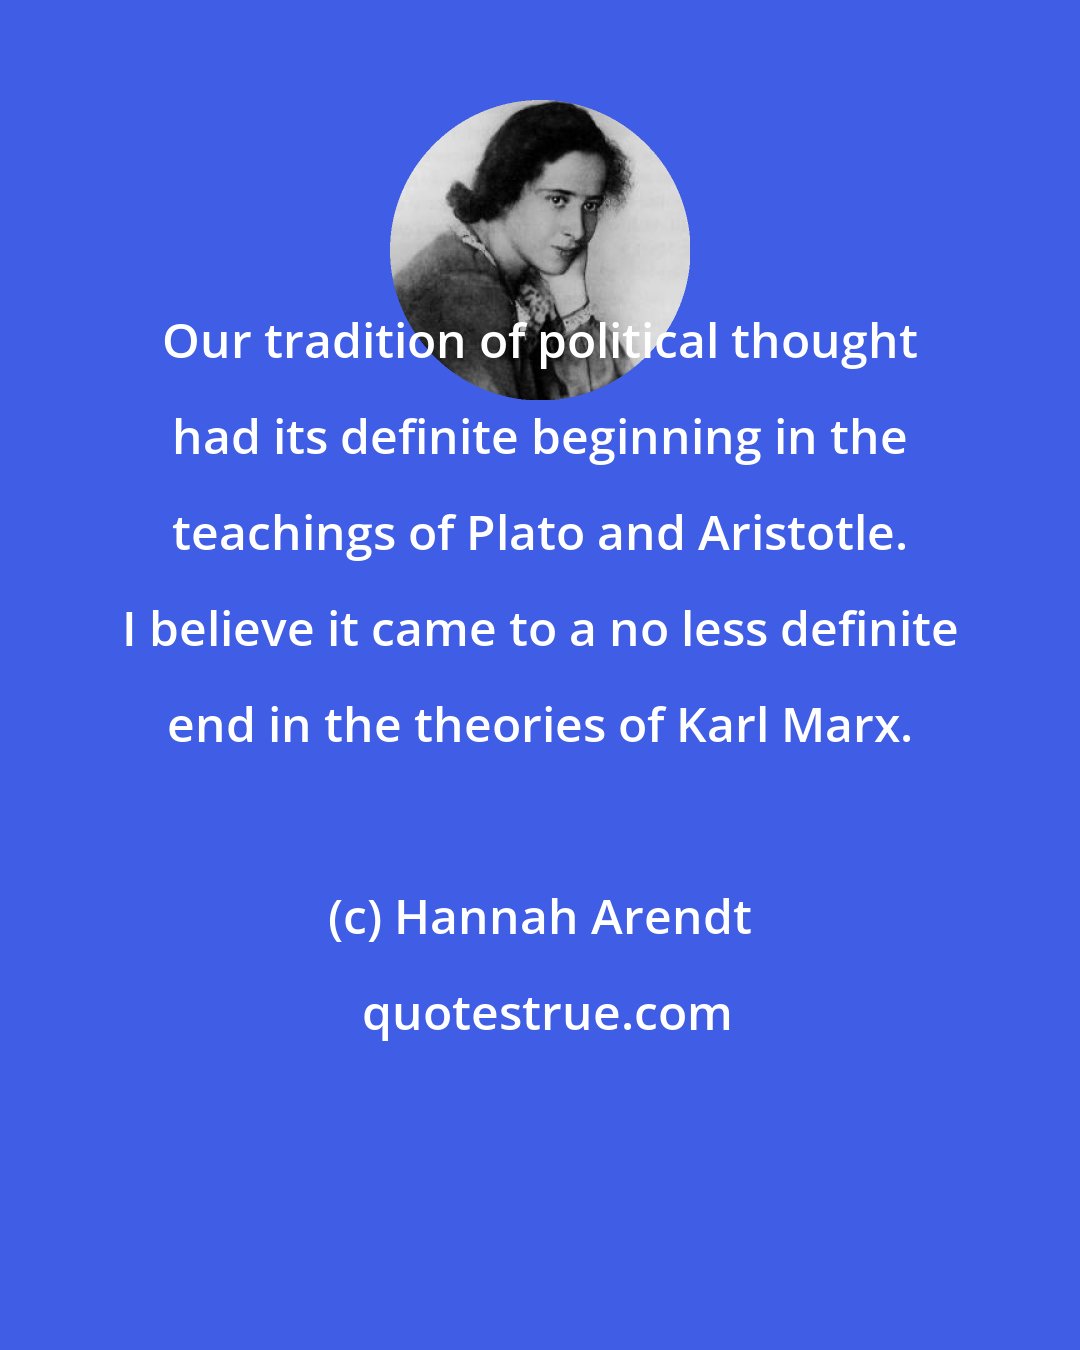 Hannah Arendt: Our tradition of political thought had its definite beginning in the teachings of Plato and Aristotle. I believe it came to a no less definite end in the theories of Karl Marx.